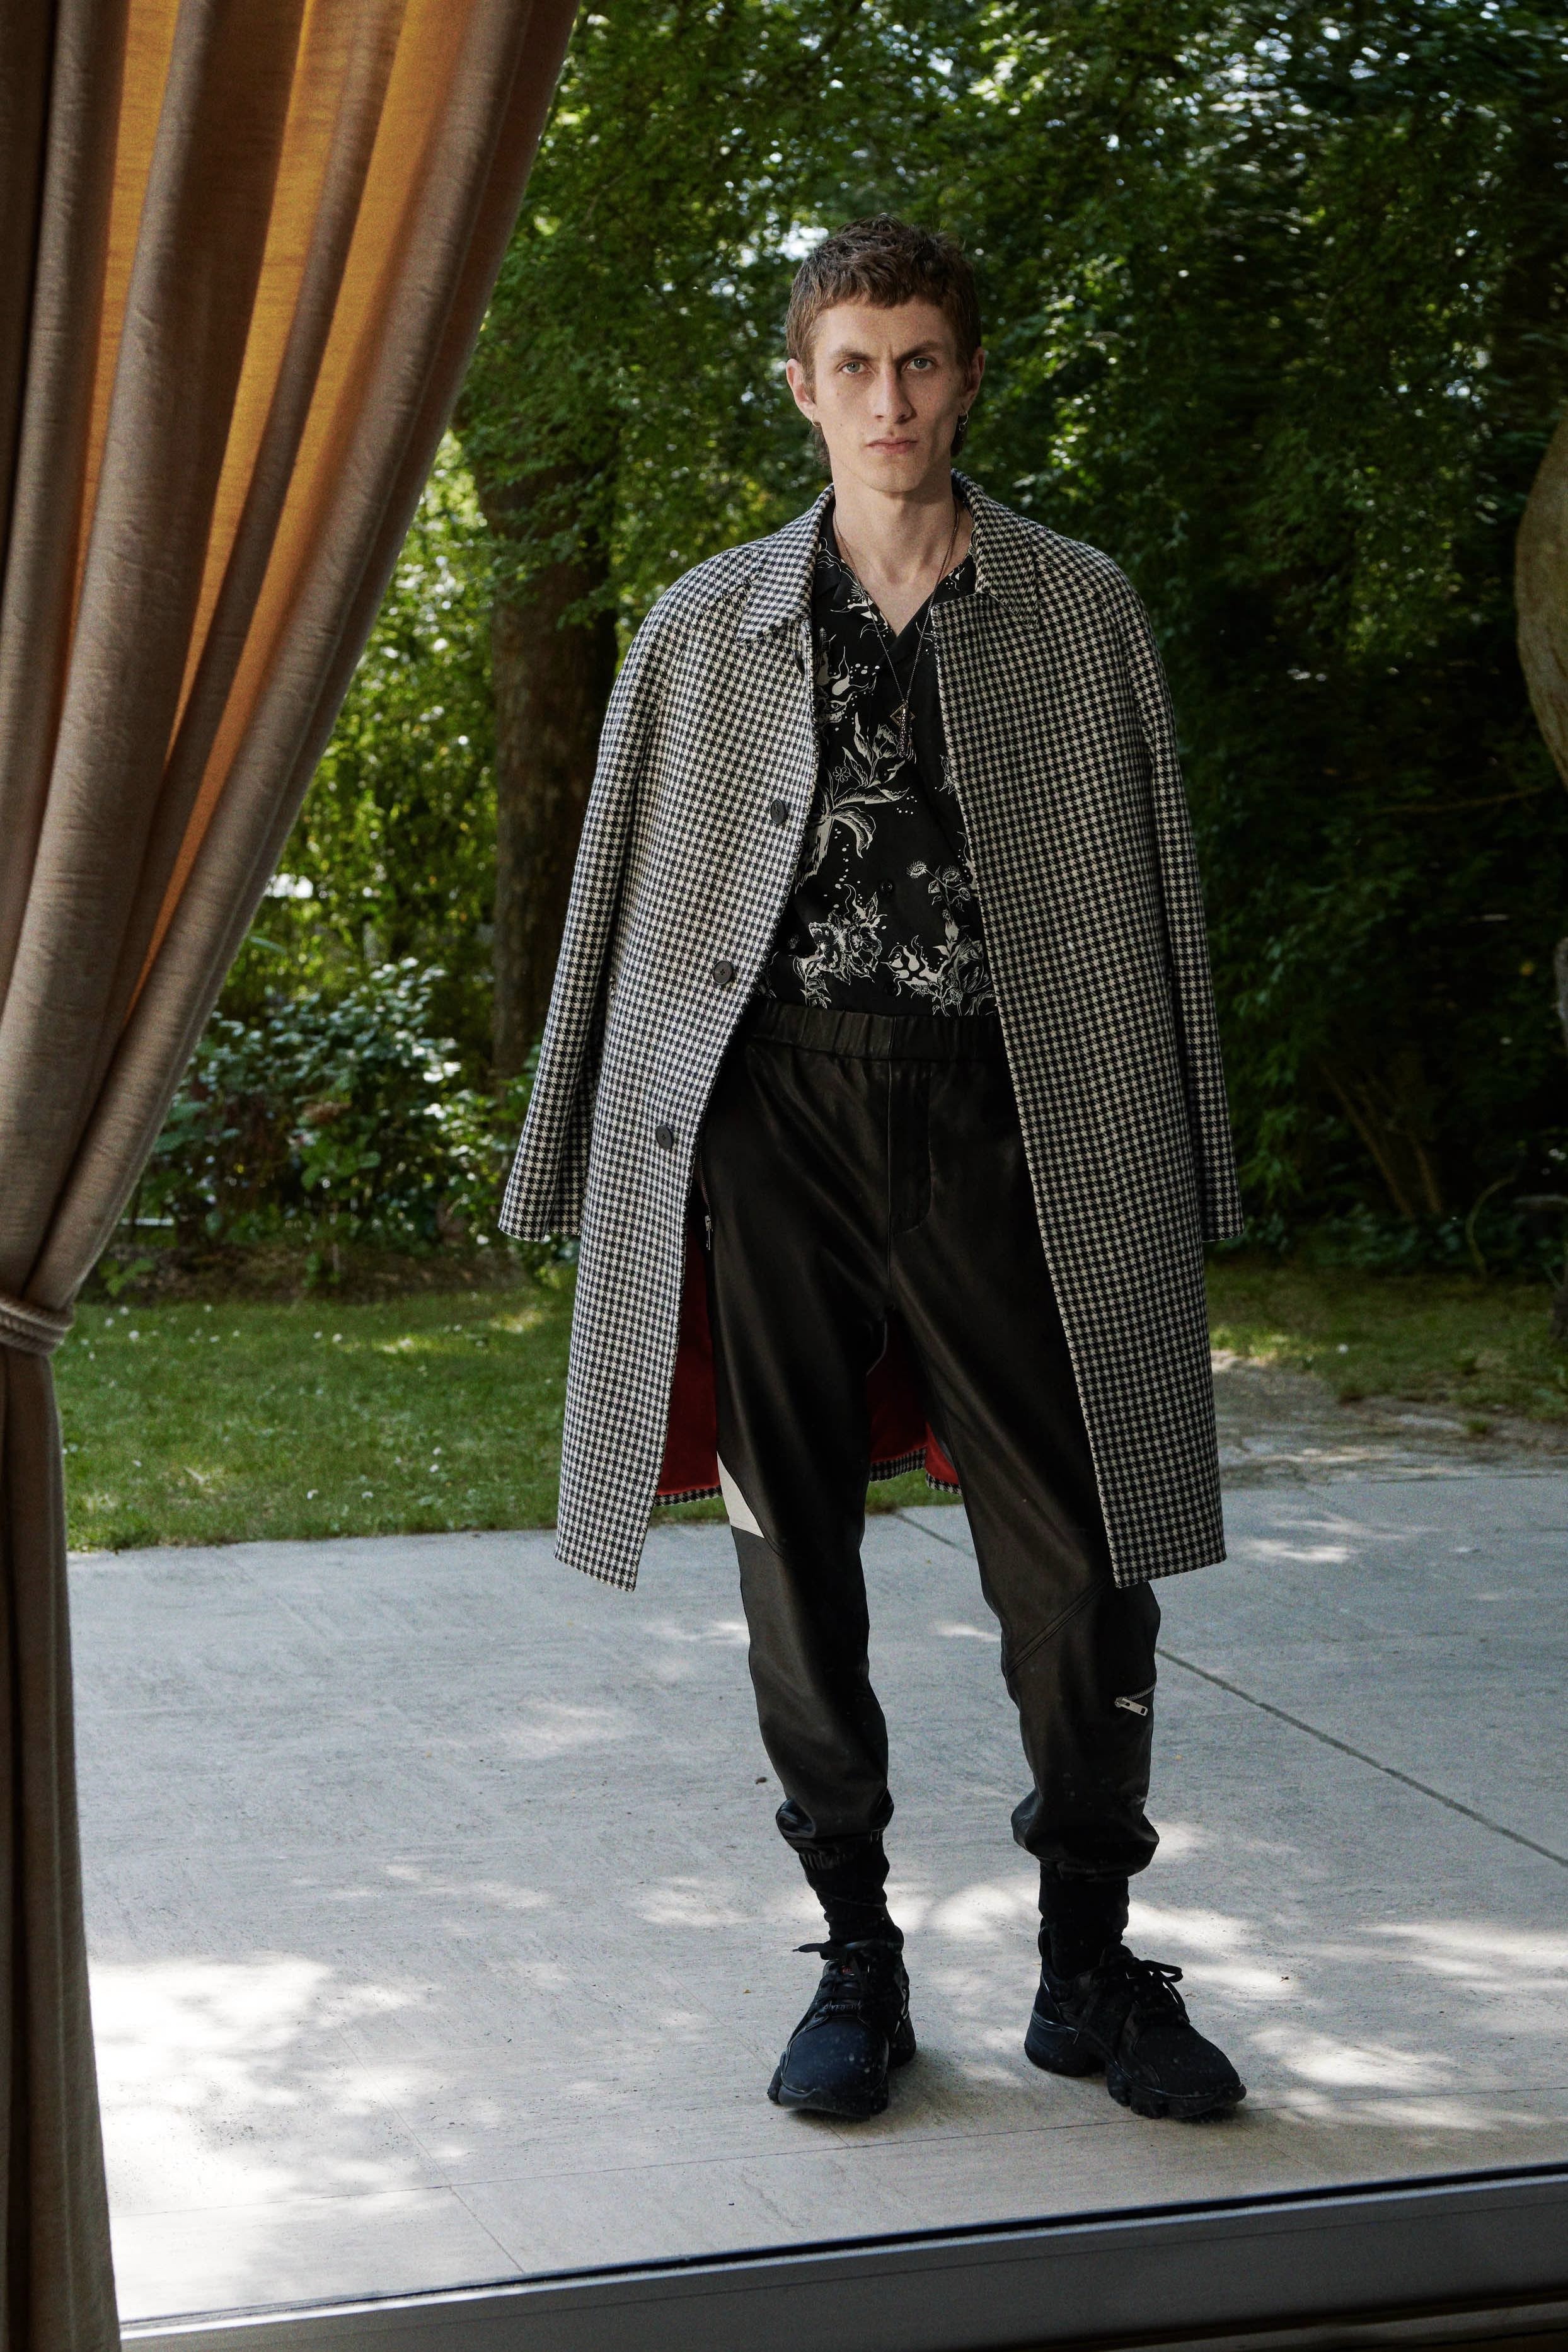 Givenchy Resort 2019 collection Clare Waight Keller runway look sport